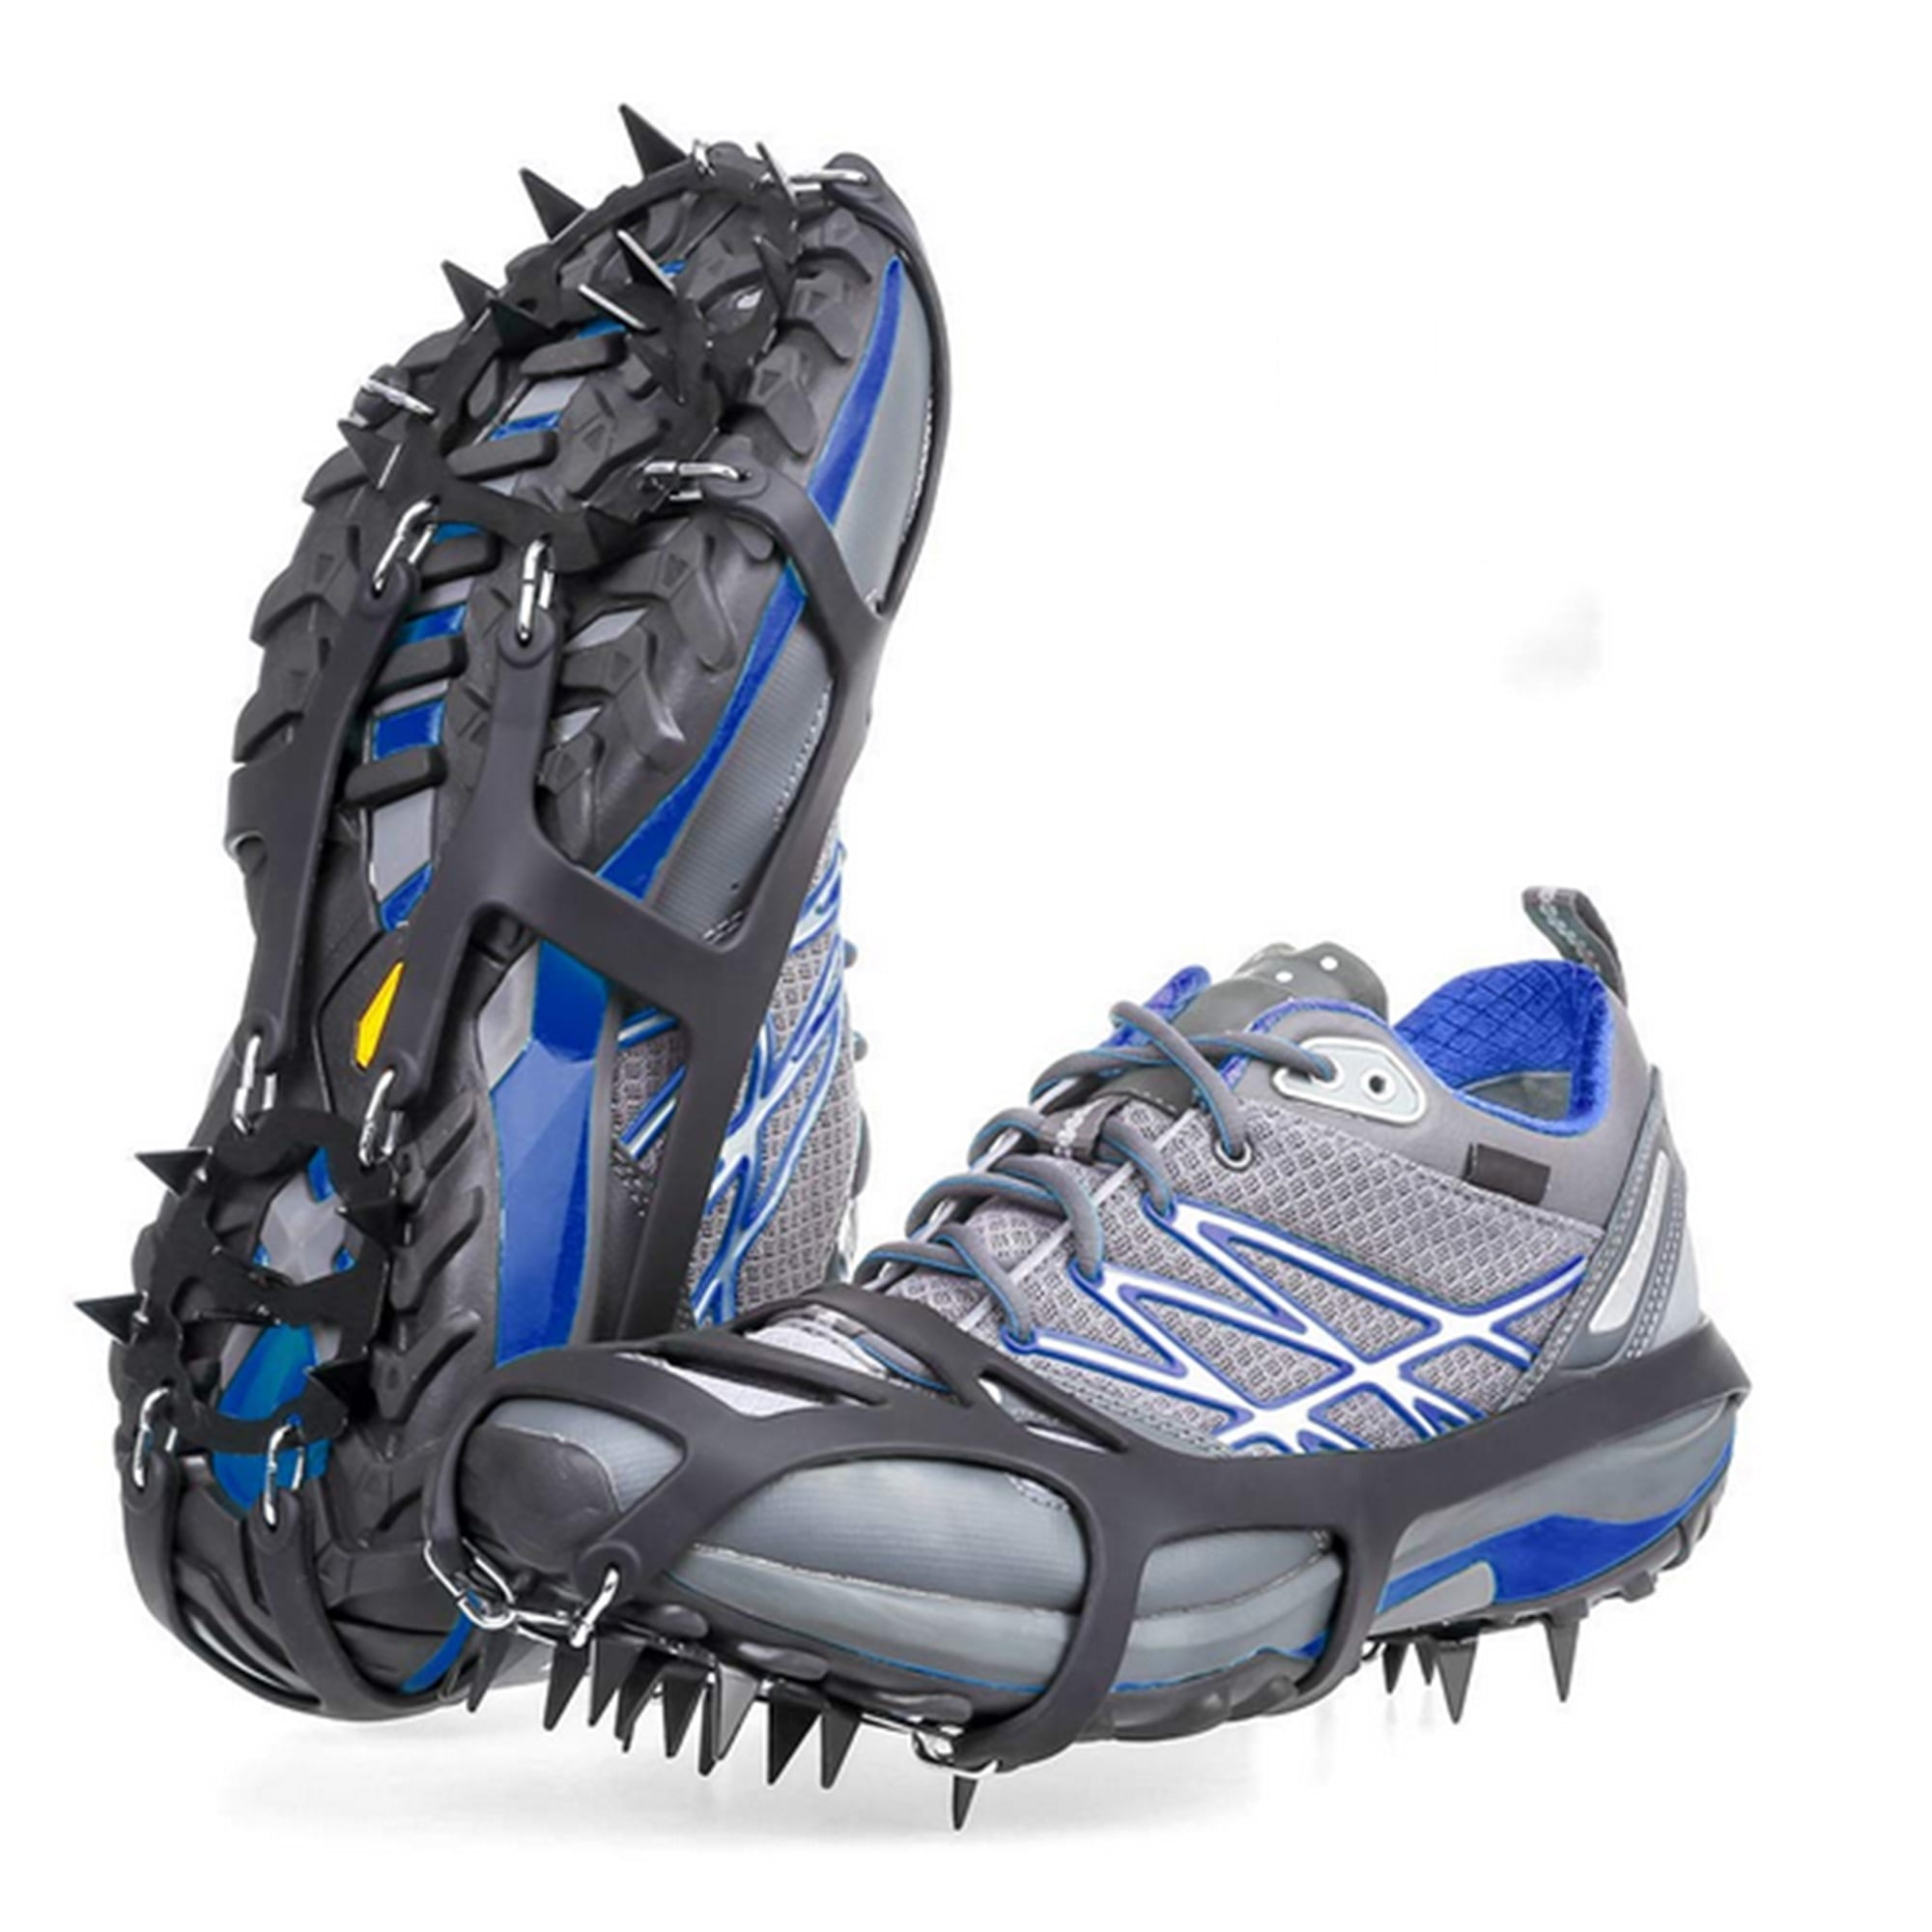 Walk Traction Cleats Anti Slip Ice Cleats Shoe Boot Grips Traction Crampon Snow Spikes Grips Cleats Ice & Snow Grips Safe Protect Walking,Jogging Hiking on Snow Ice